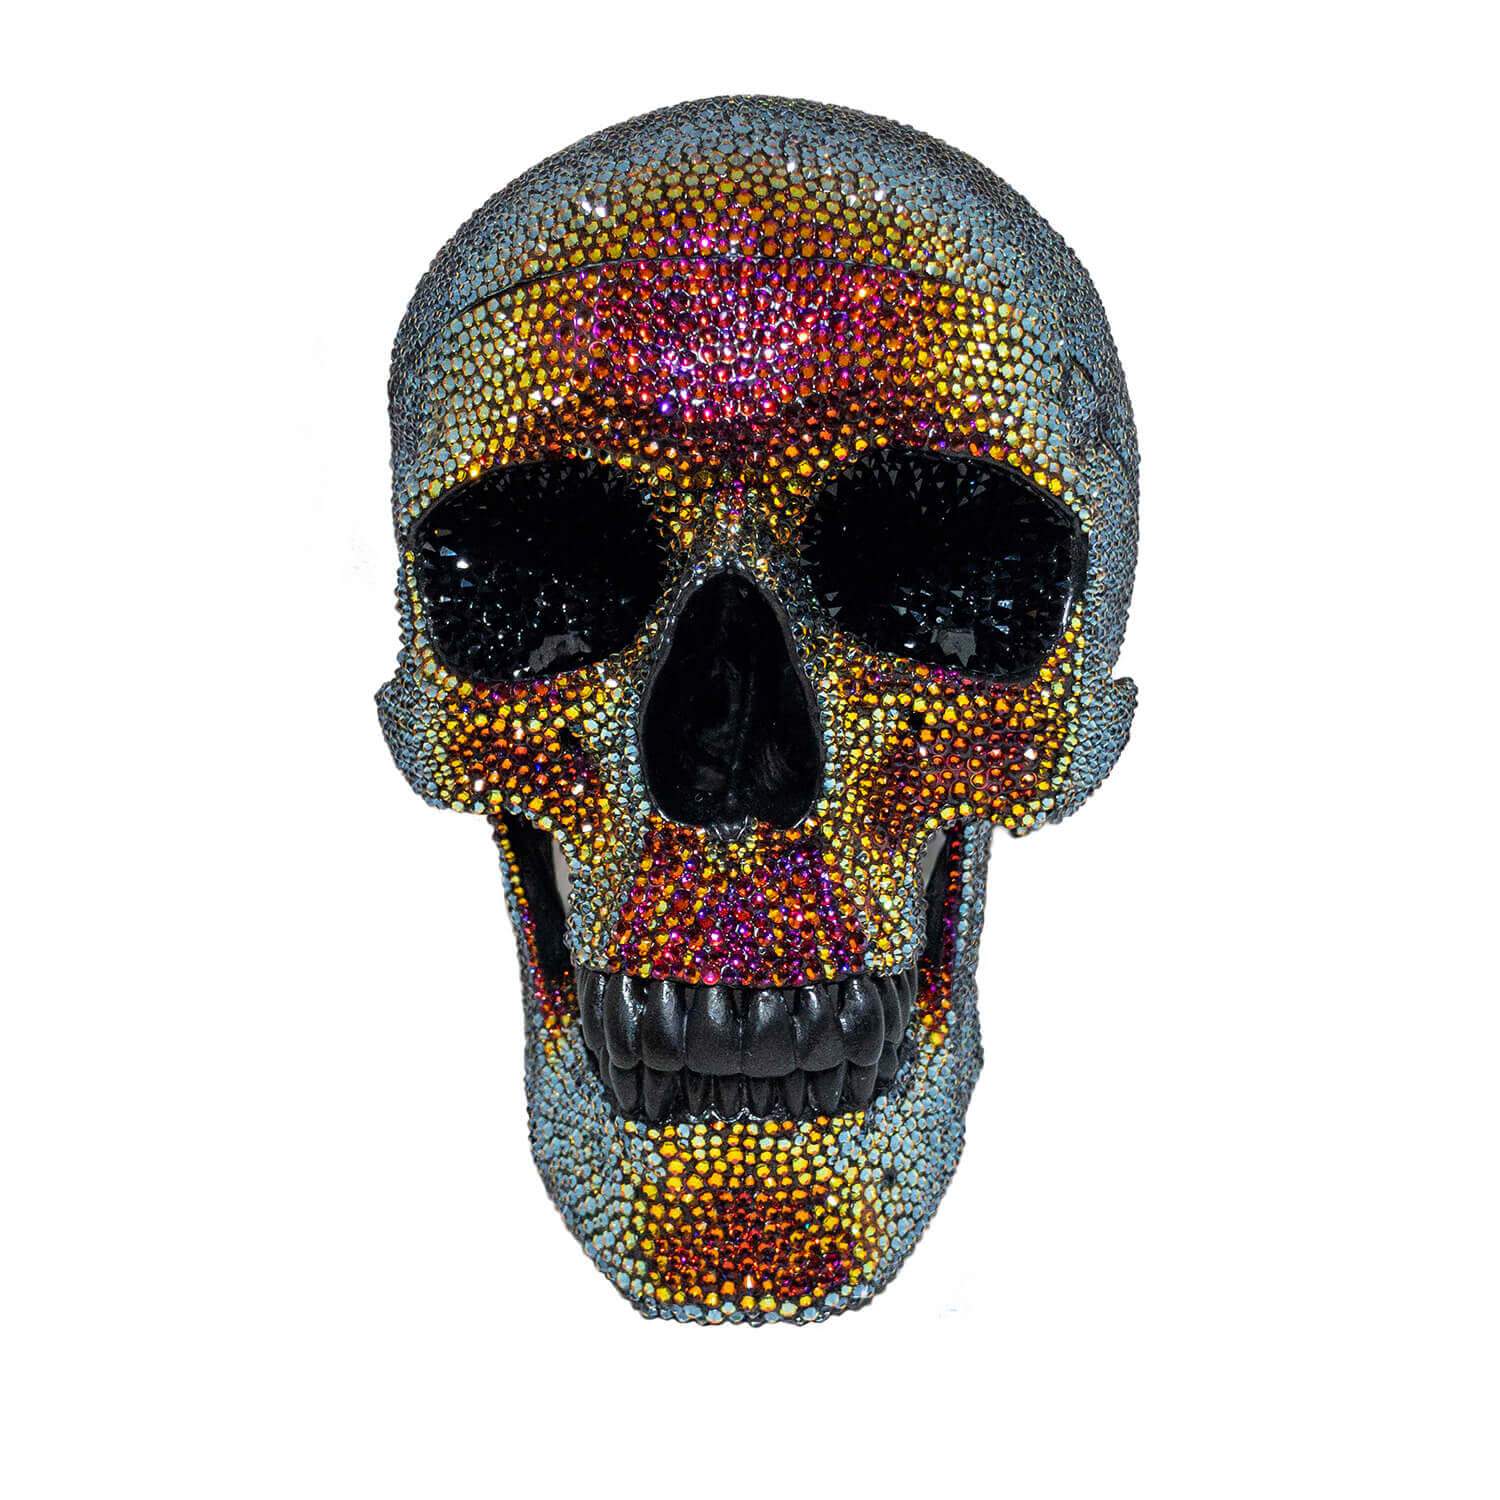 An anotomically correct human skull hand paved with over 10000 Swarovski crystals!